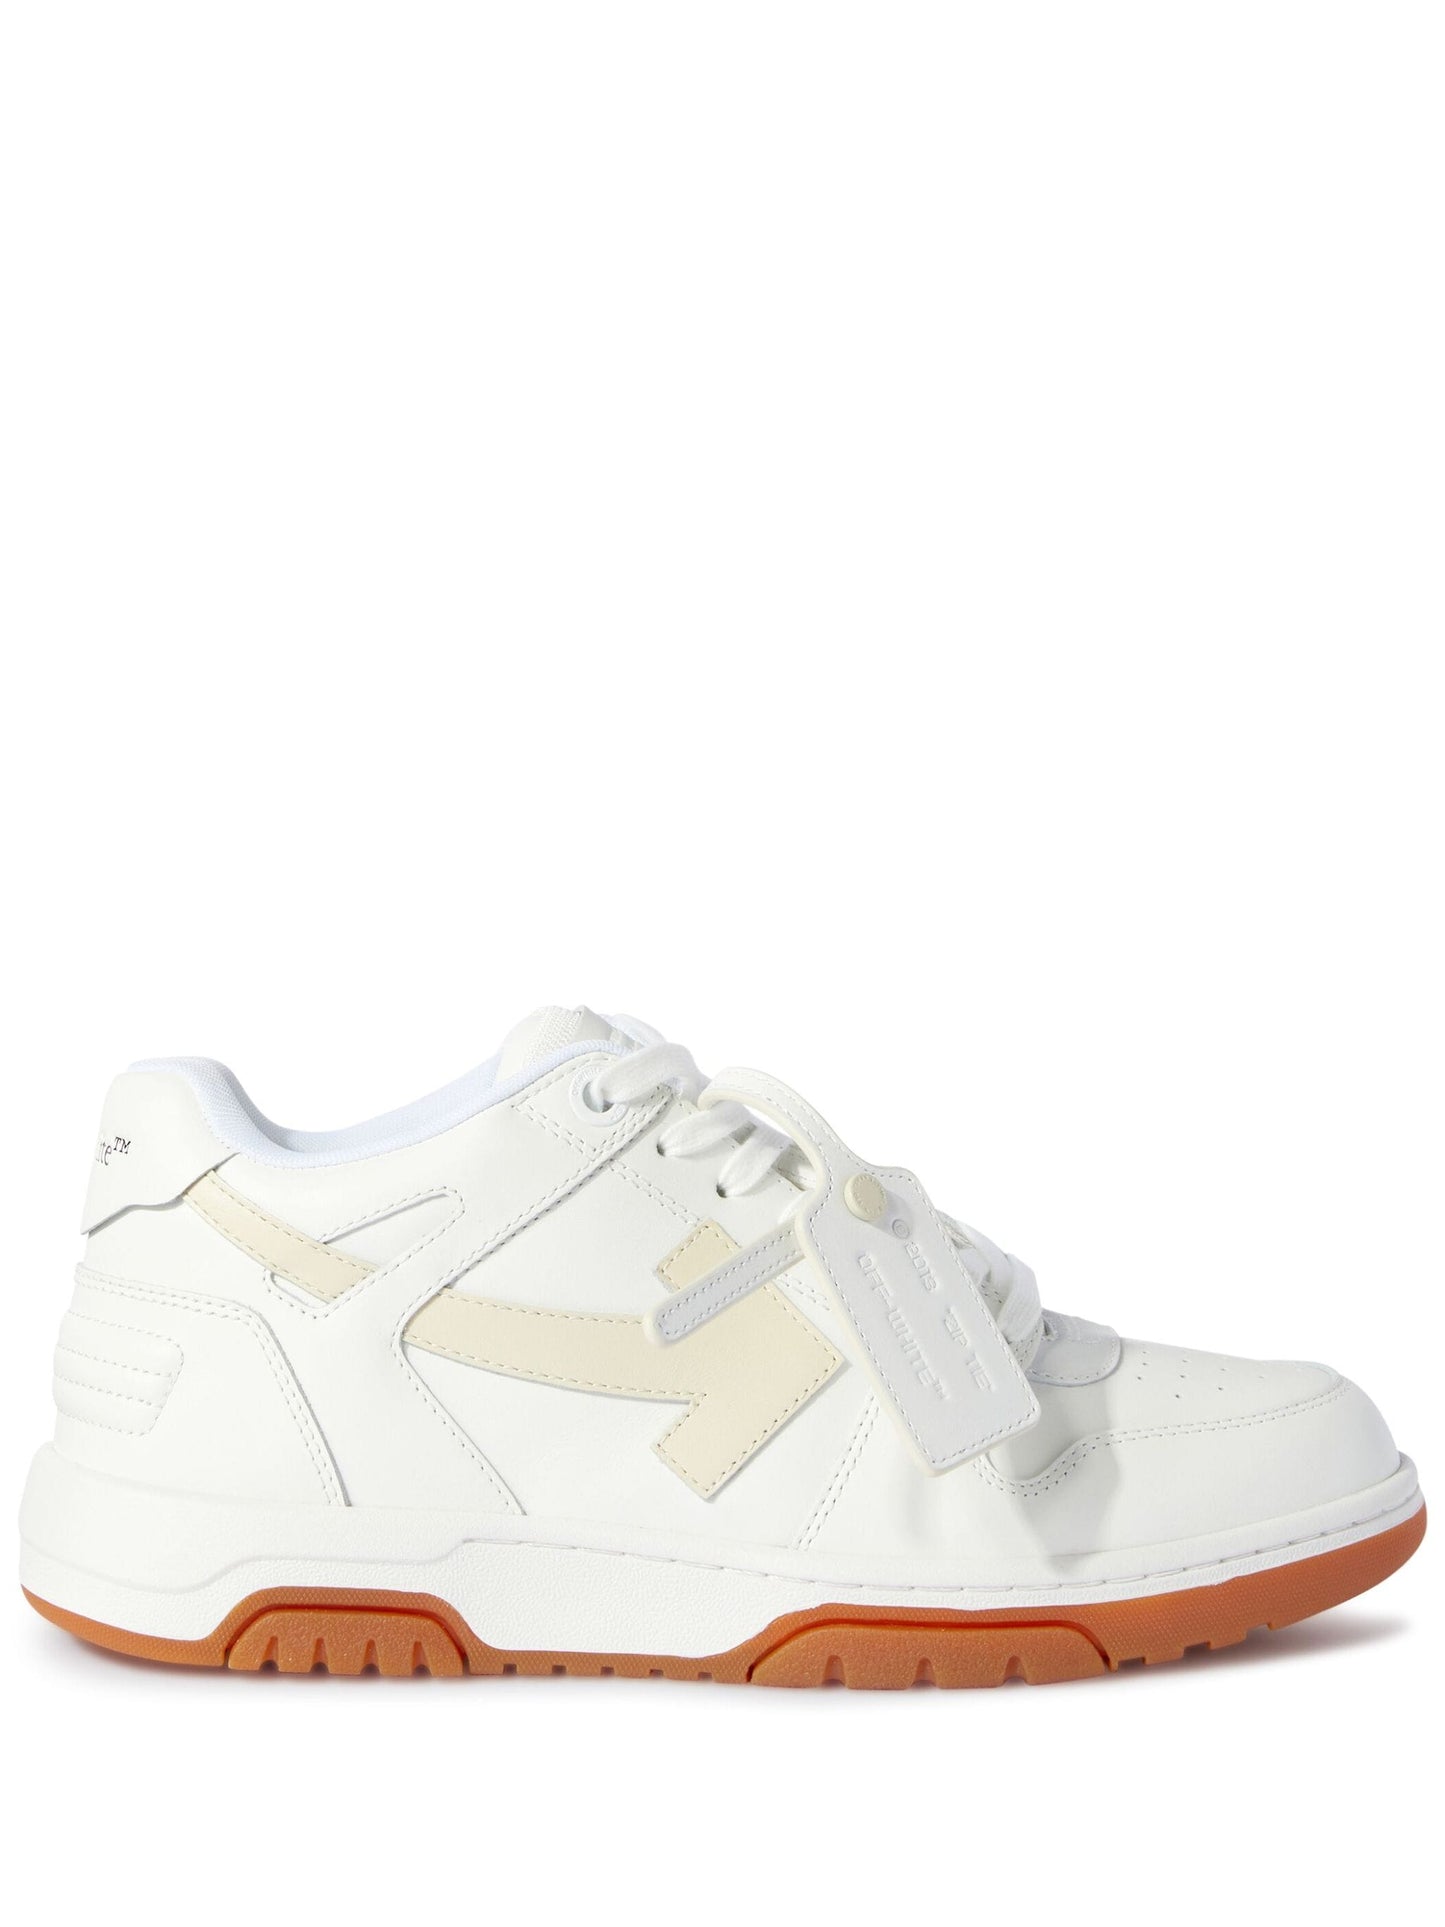 OFF WHITE OUT OF OFFICE CALF LEATHER